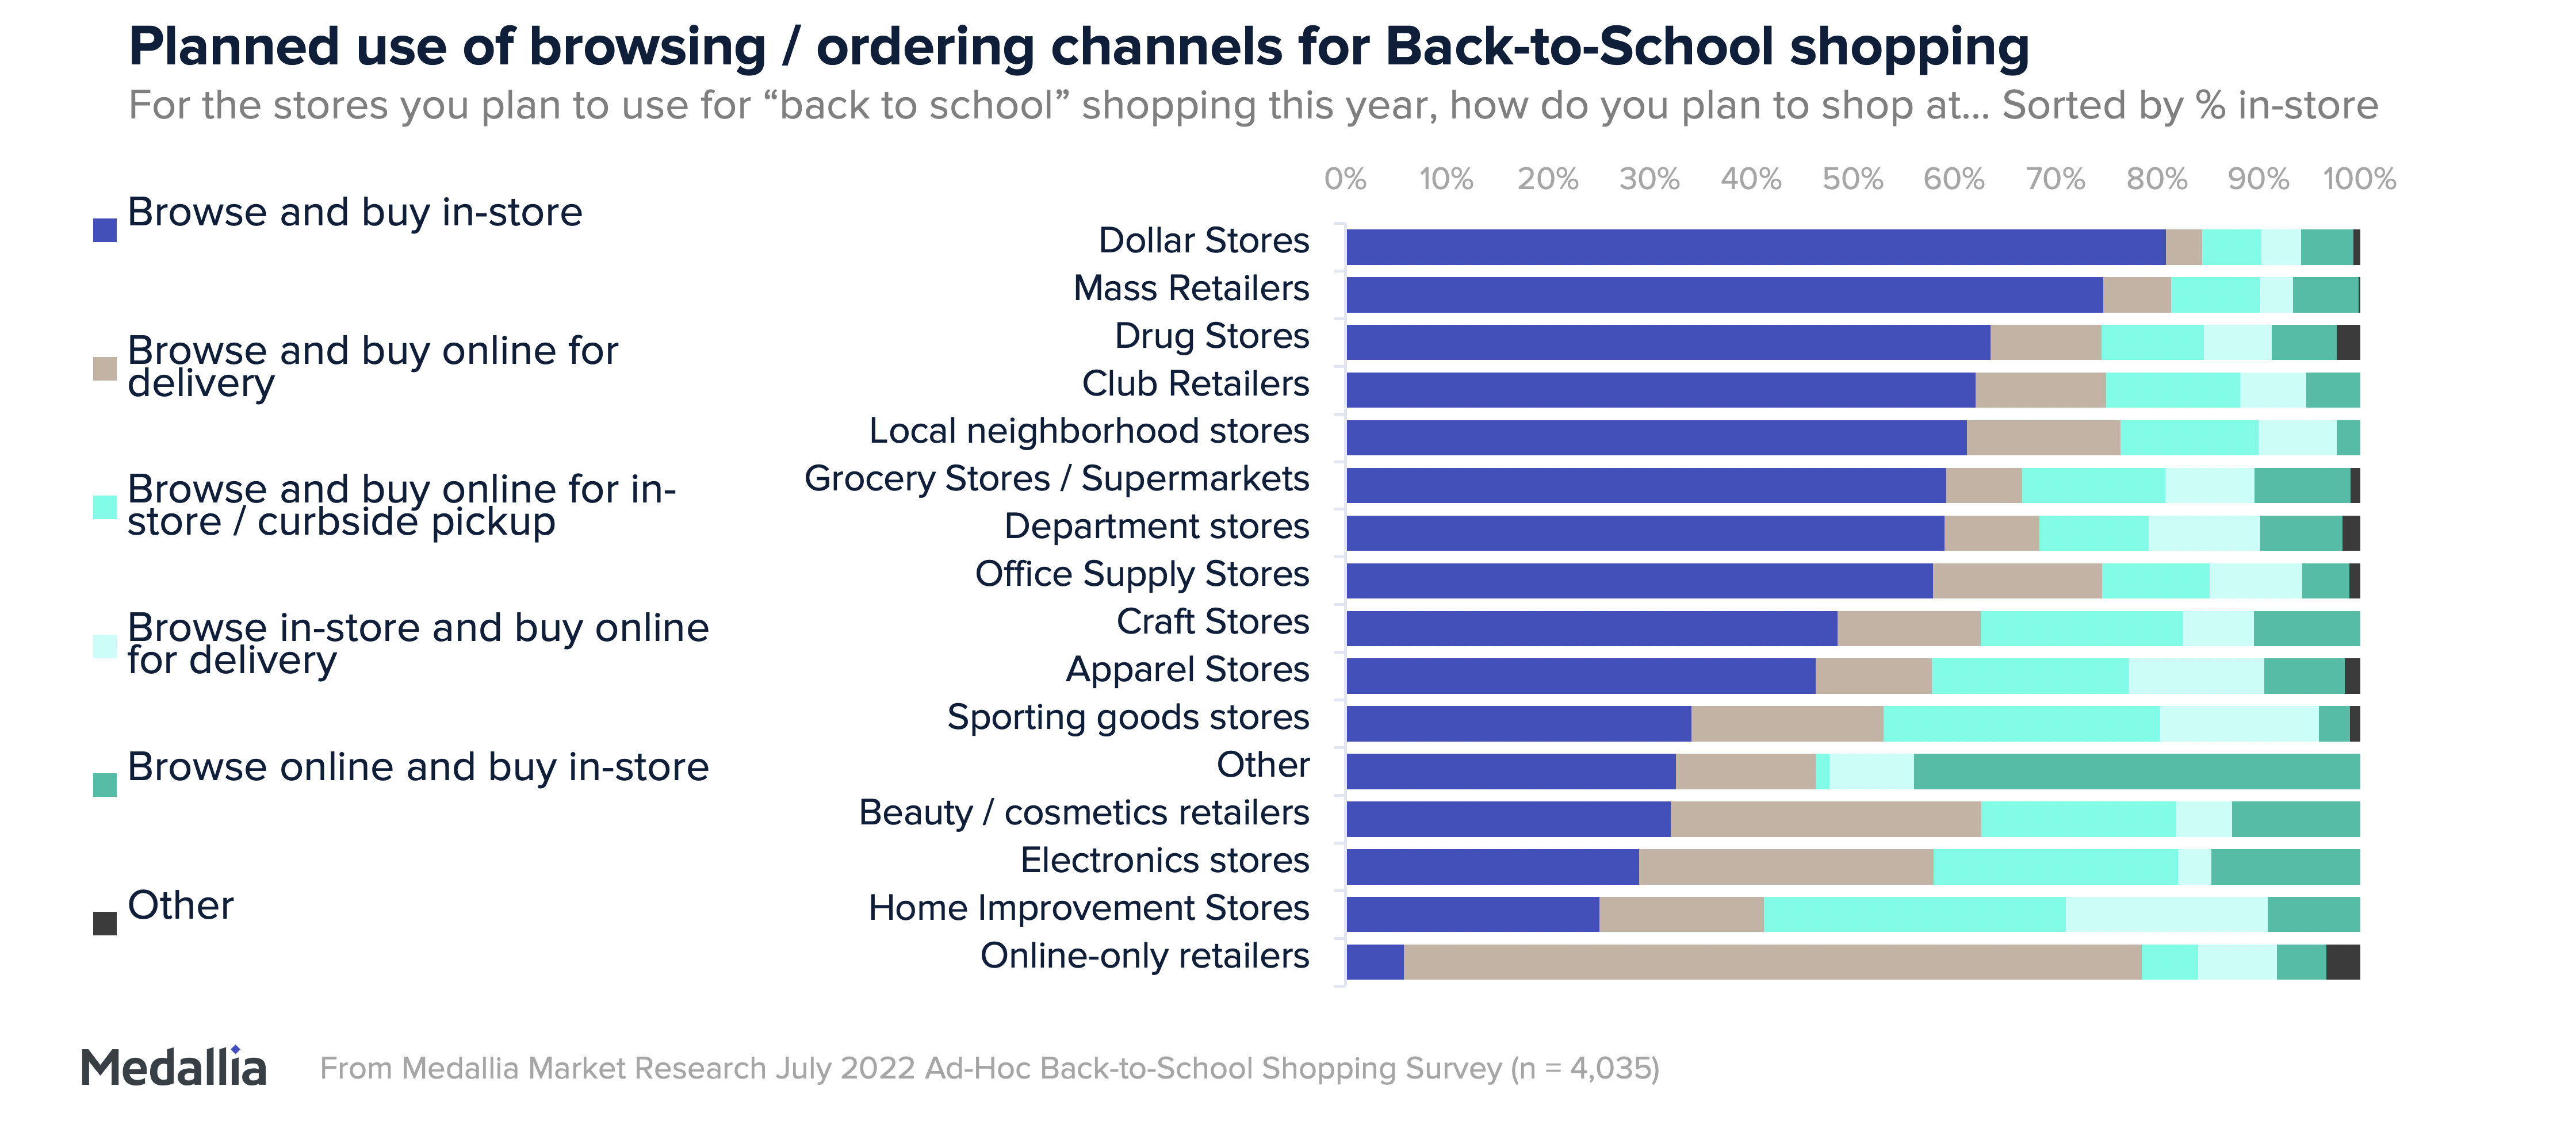 Planned use of browsing / ordering channels for back-to-school shopping. Not many claimed they would use online-only retailers.